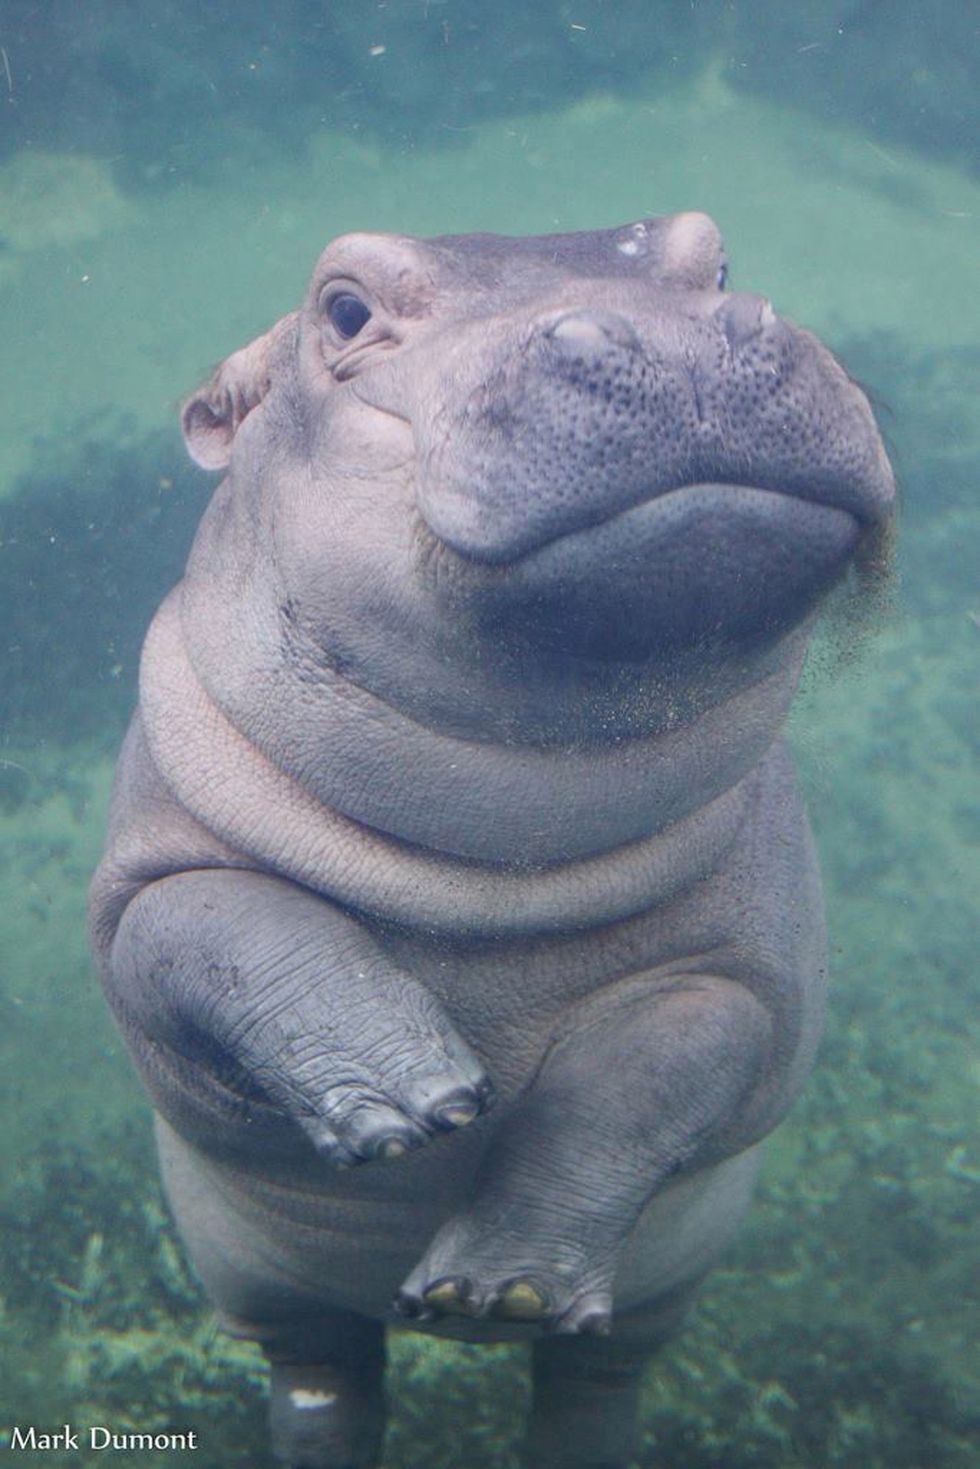 Introducing Our Newest Celebrity, Fiona The Hippo